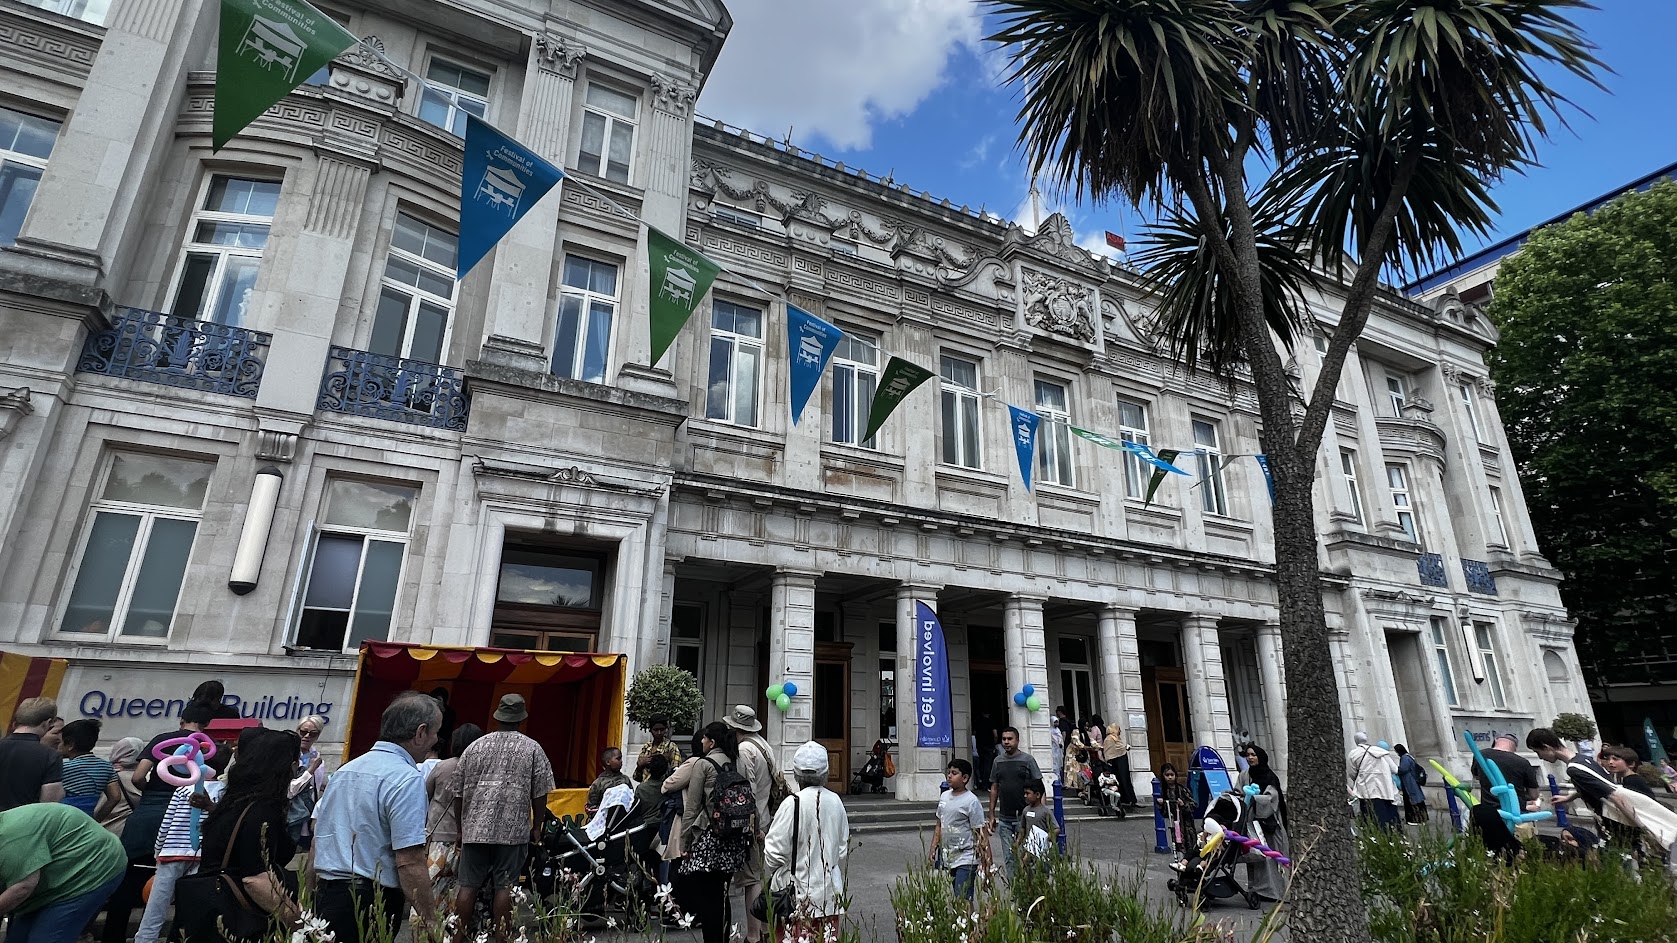 A classical style building in the background. People are festively gathered in the square in front of it. The square is decorated with green and blue bunting which reads: Festival of Communities.